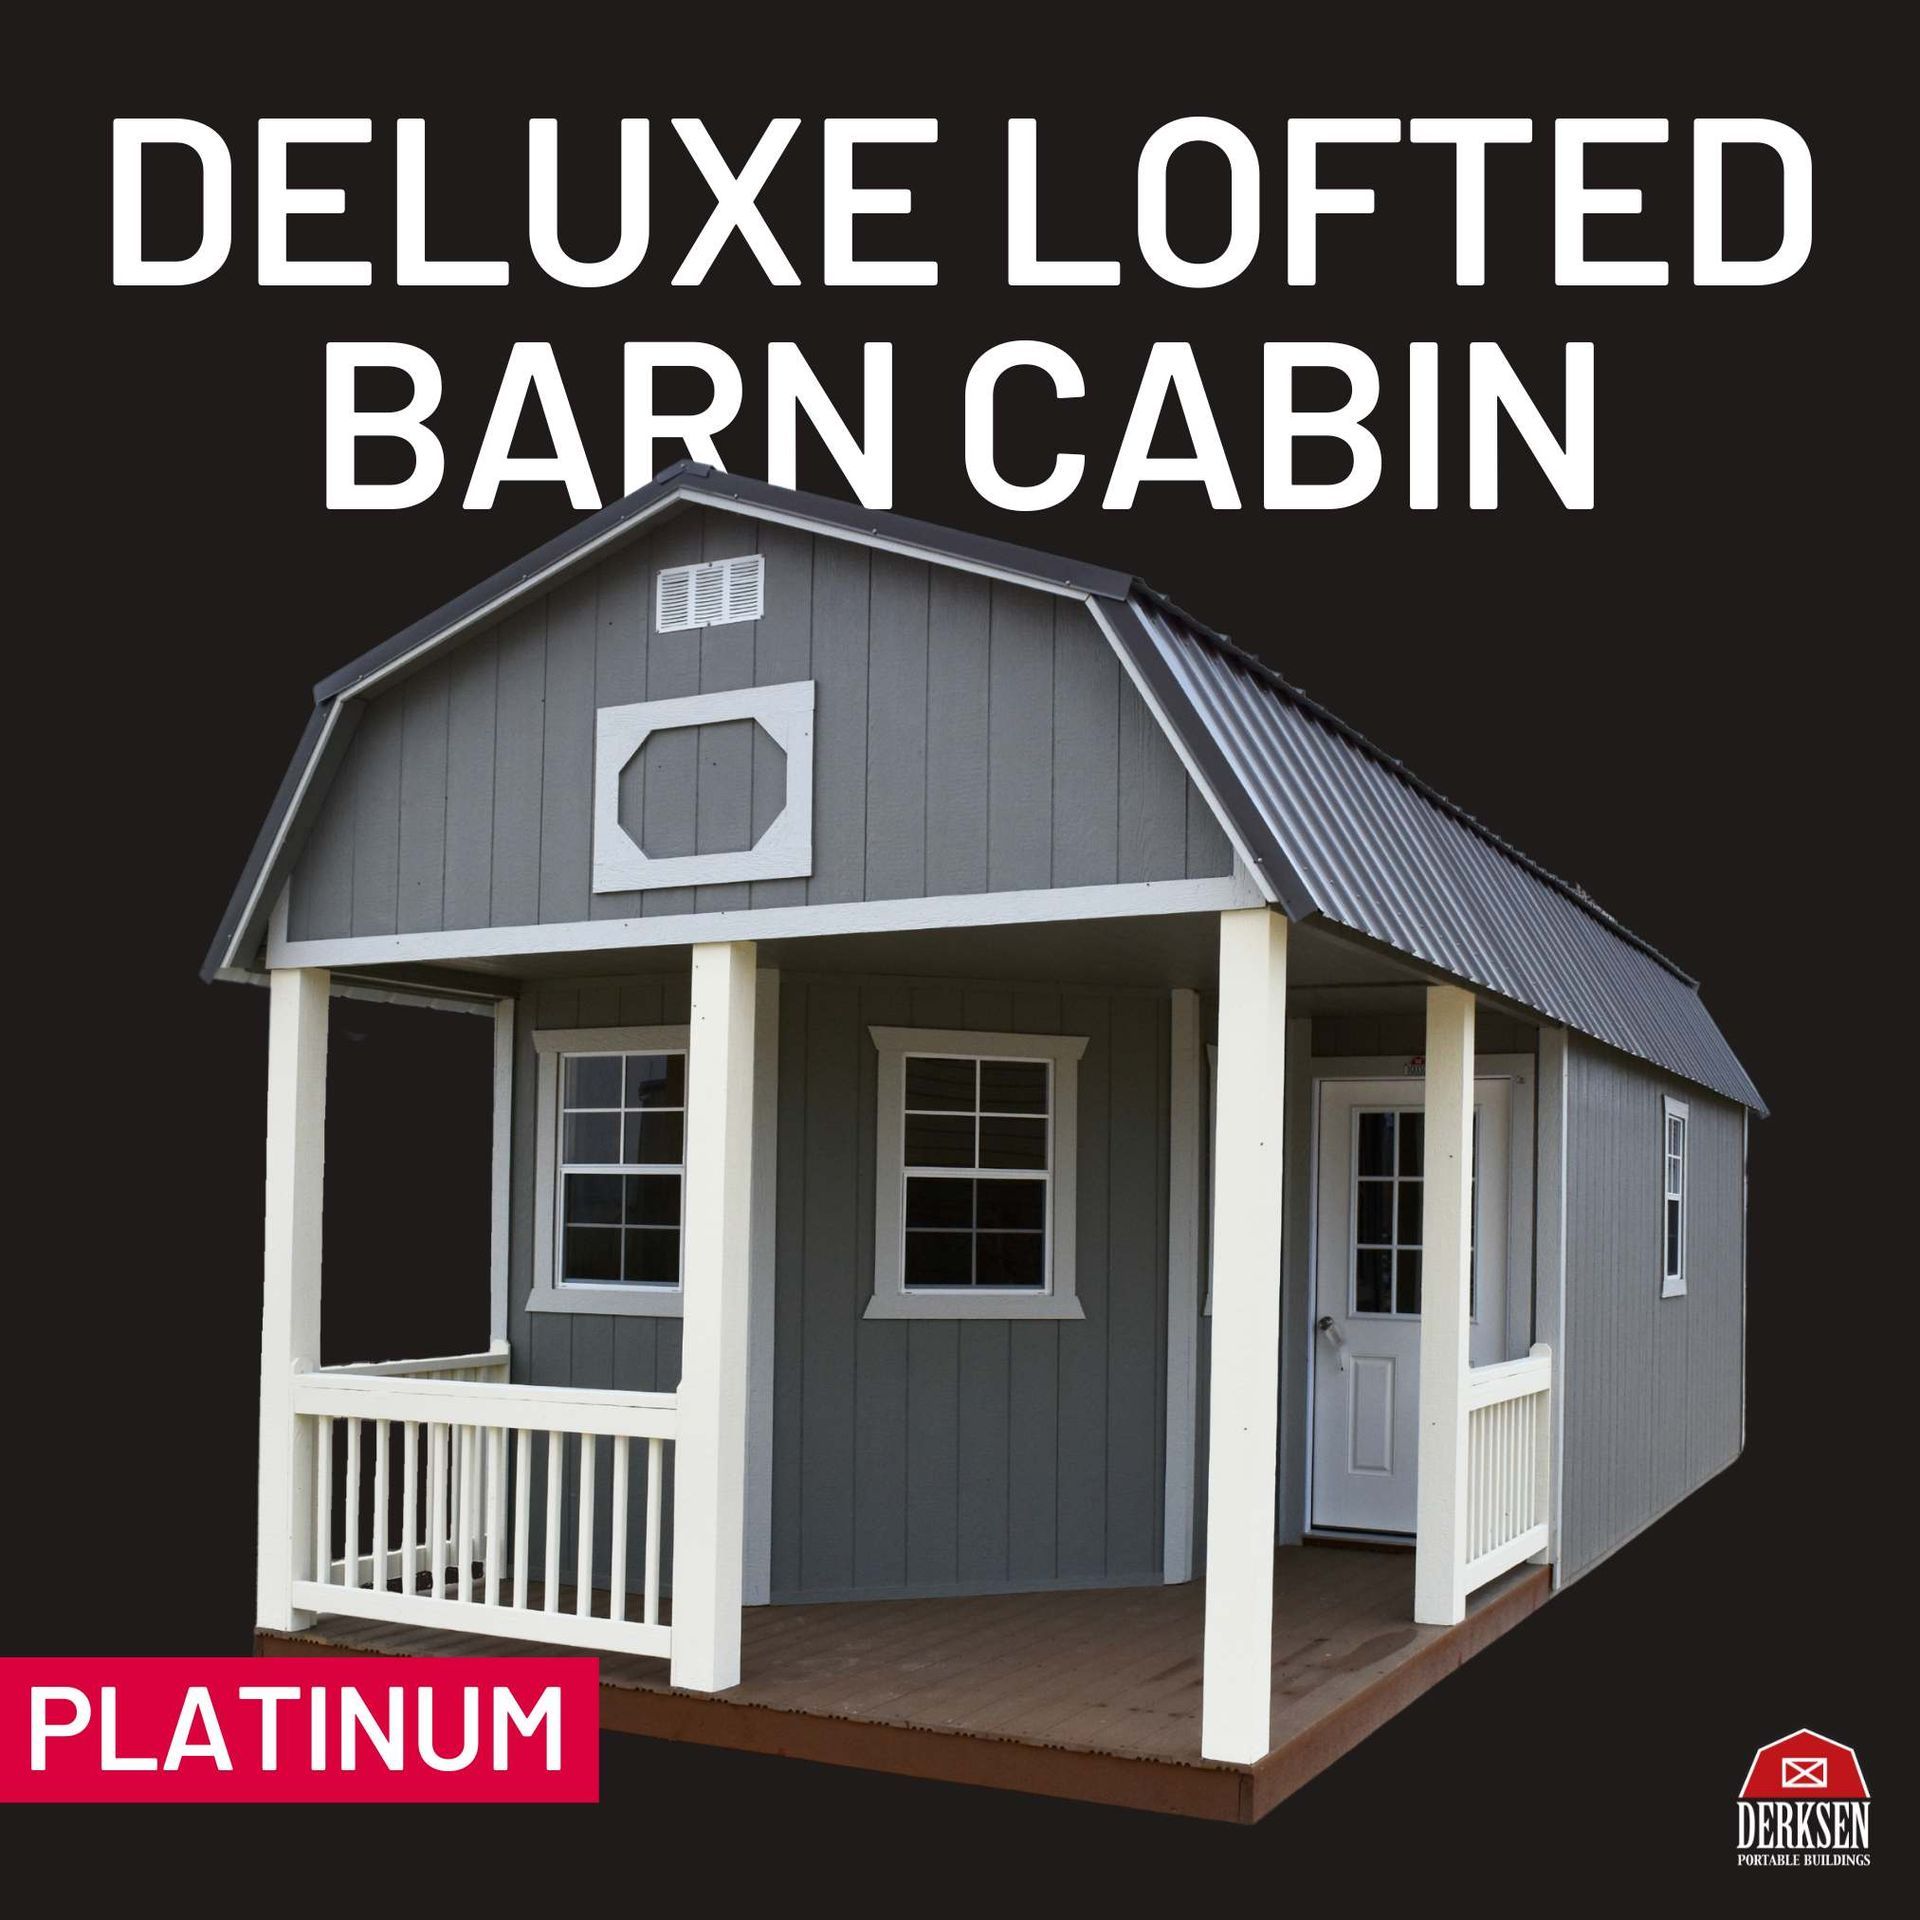 a picture of a deluxe lofted barn cabin with a porch